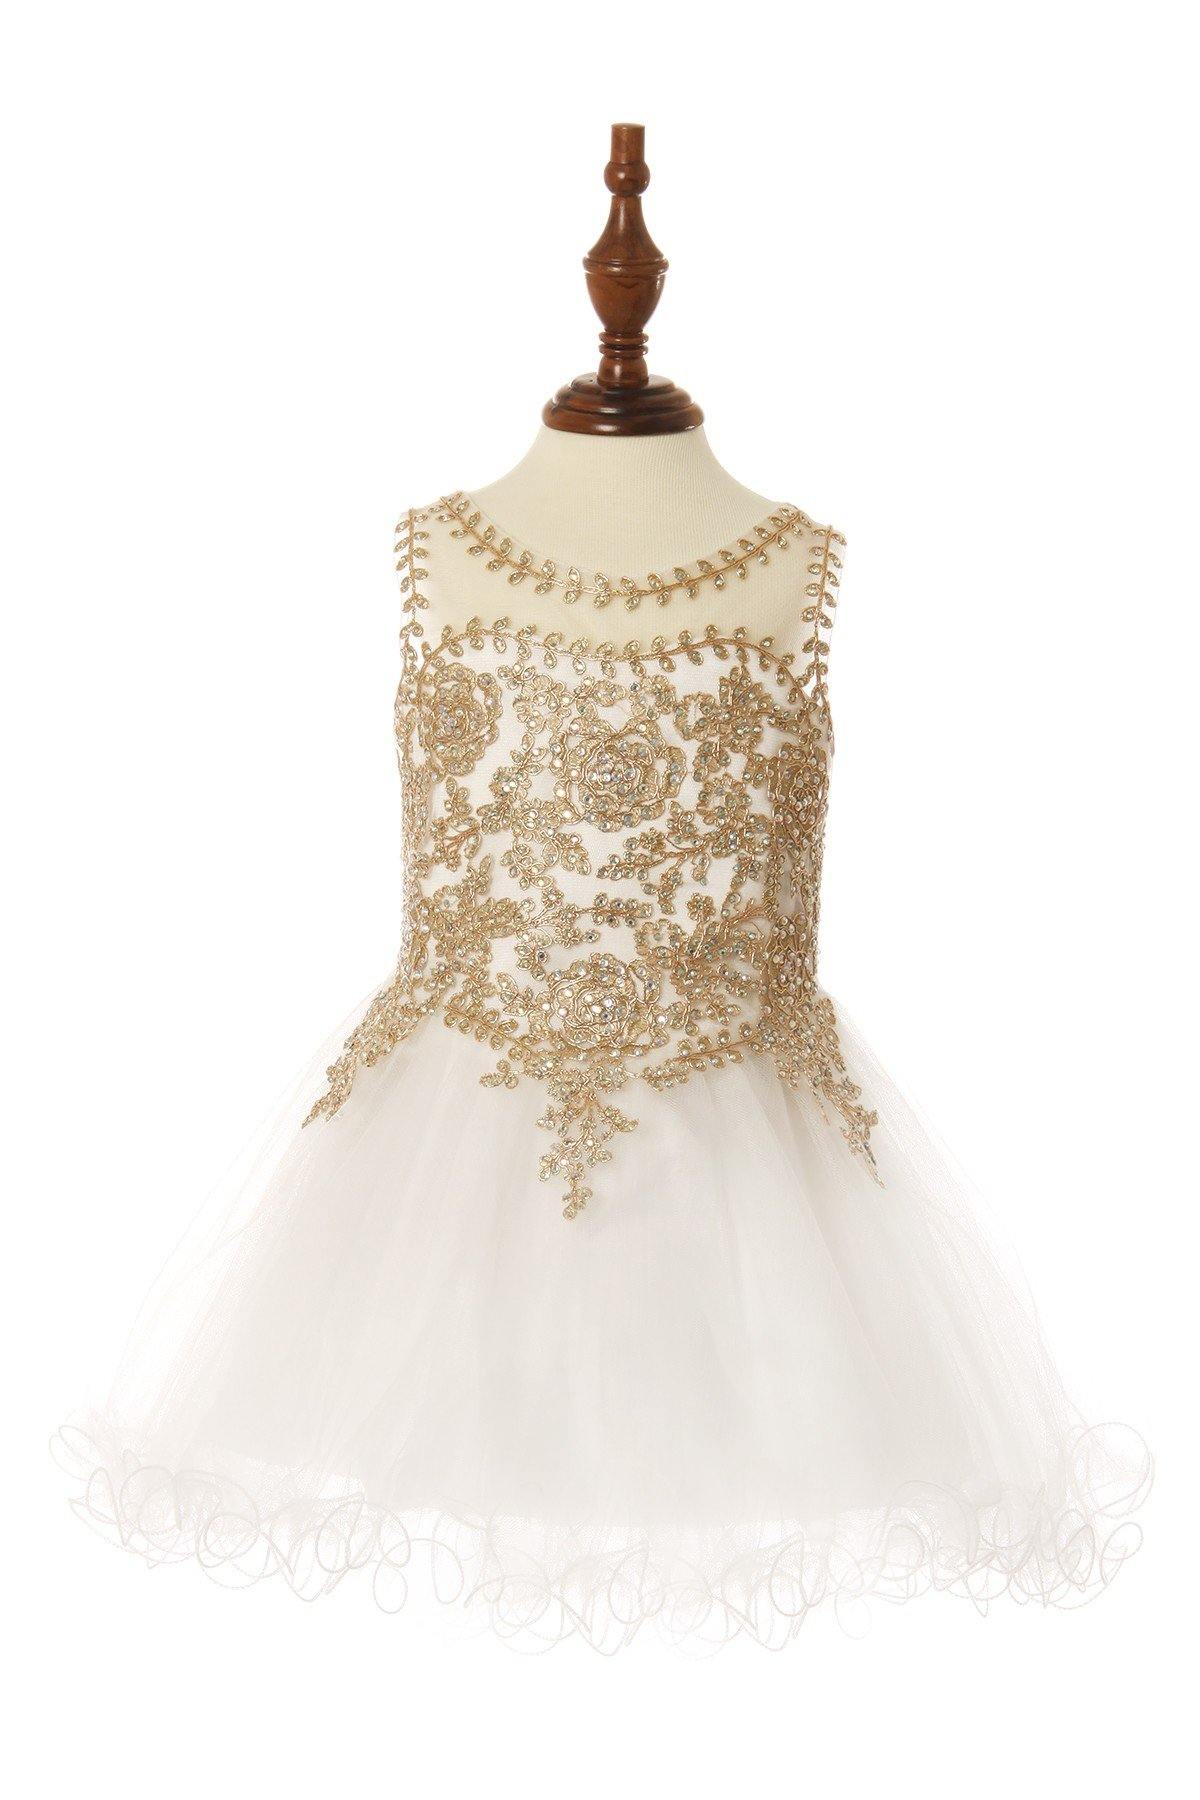 Sleeveless Gold Embellished Short Party Dress - The Dress Outlet Cinderella Couture